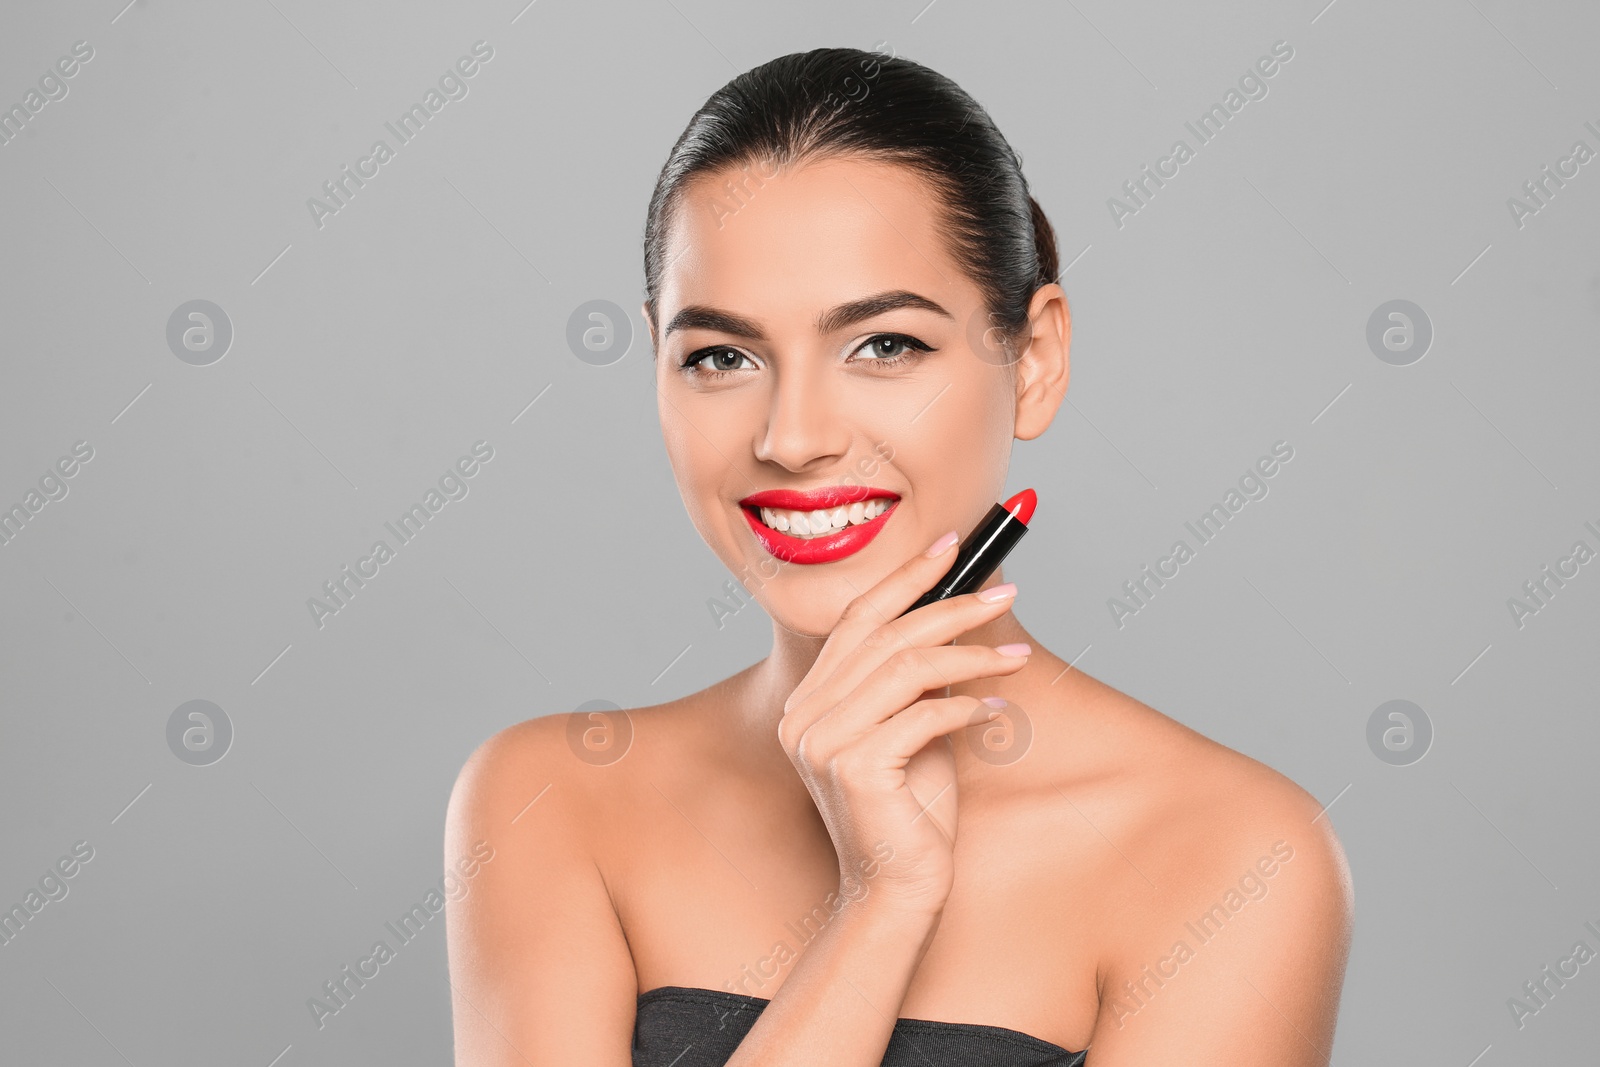 Photo of Young woman applying lipstick on color background